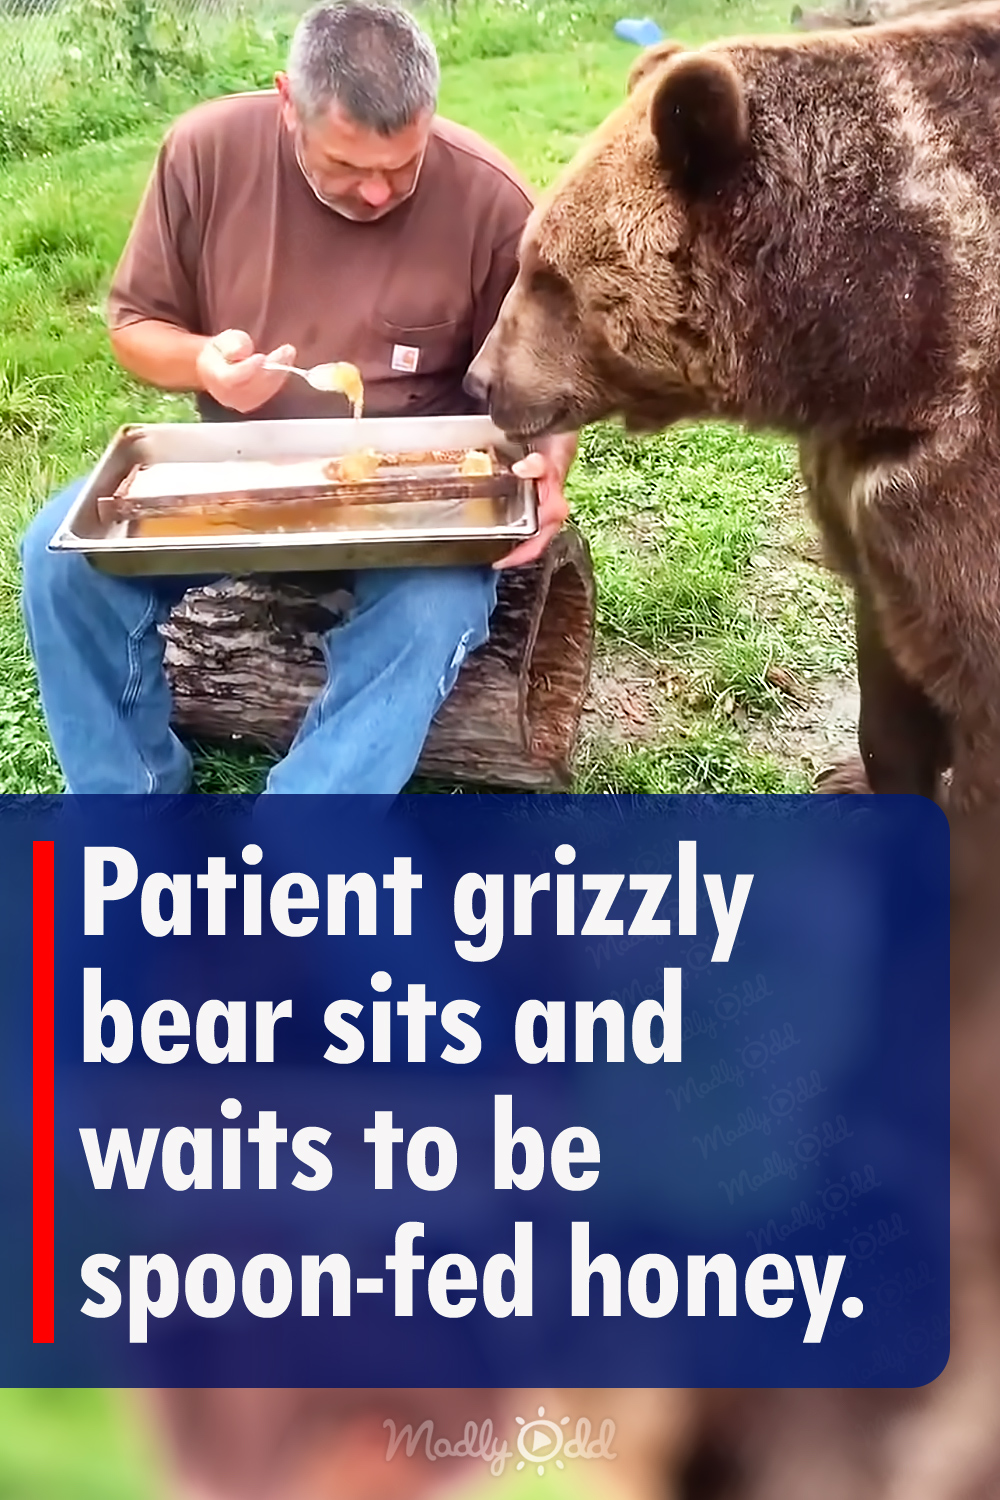 Patient grizzly bear sits and waits to be spoon-fed honey.